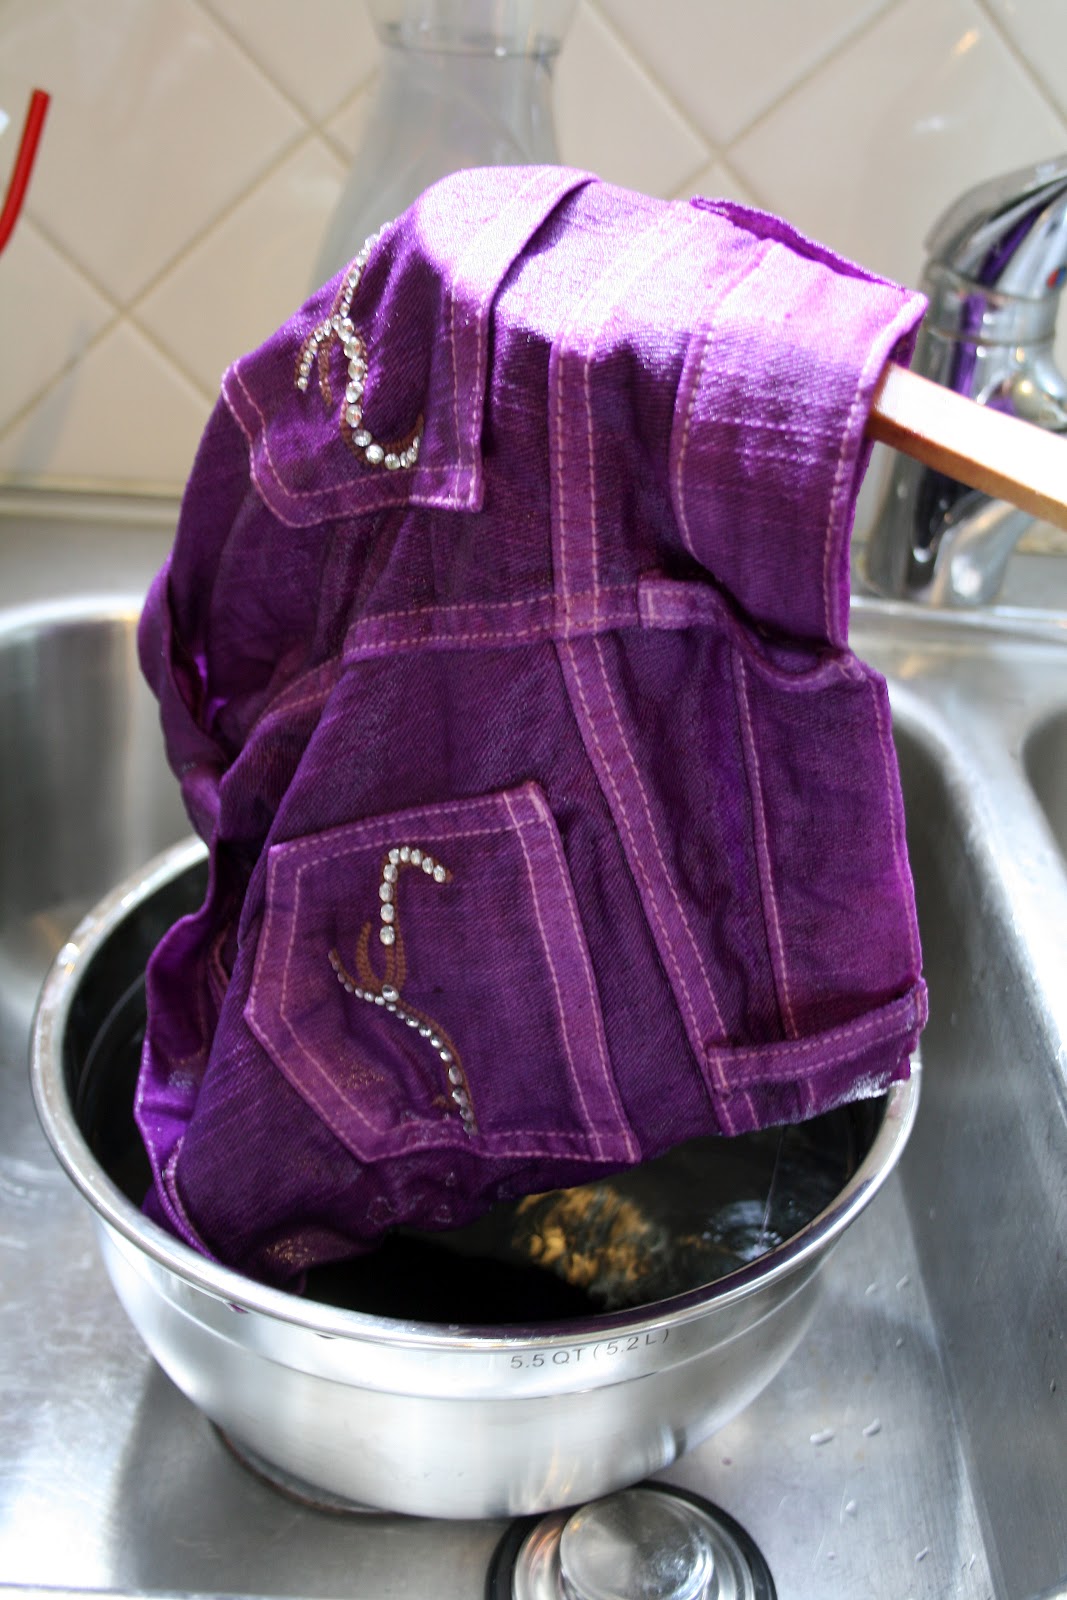 one clever mom: Dyed Purple shorts!